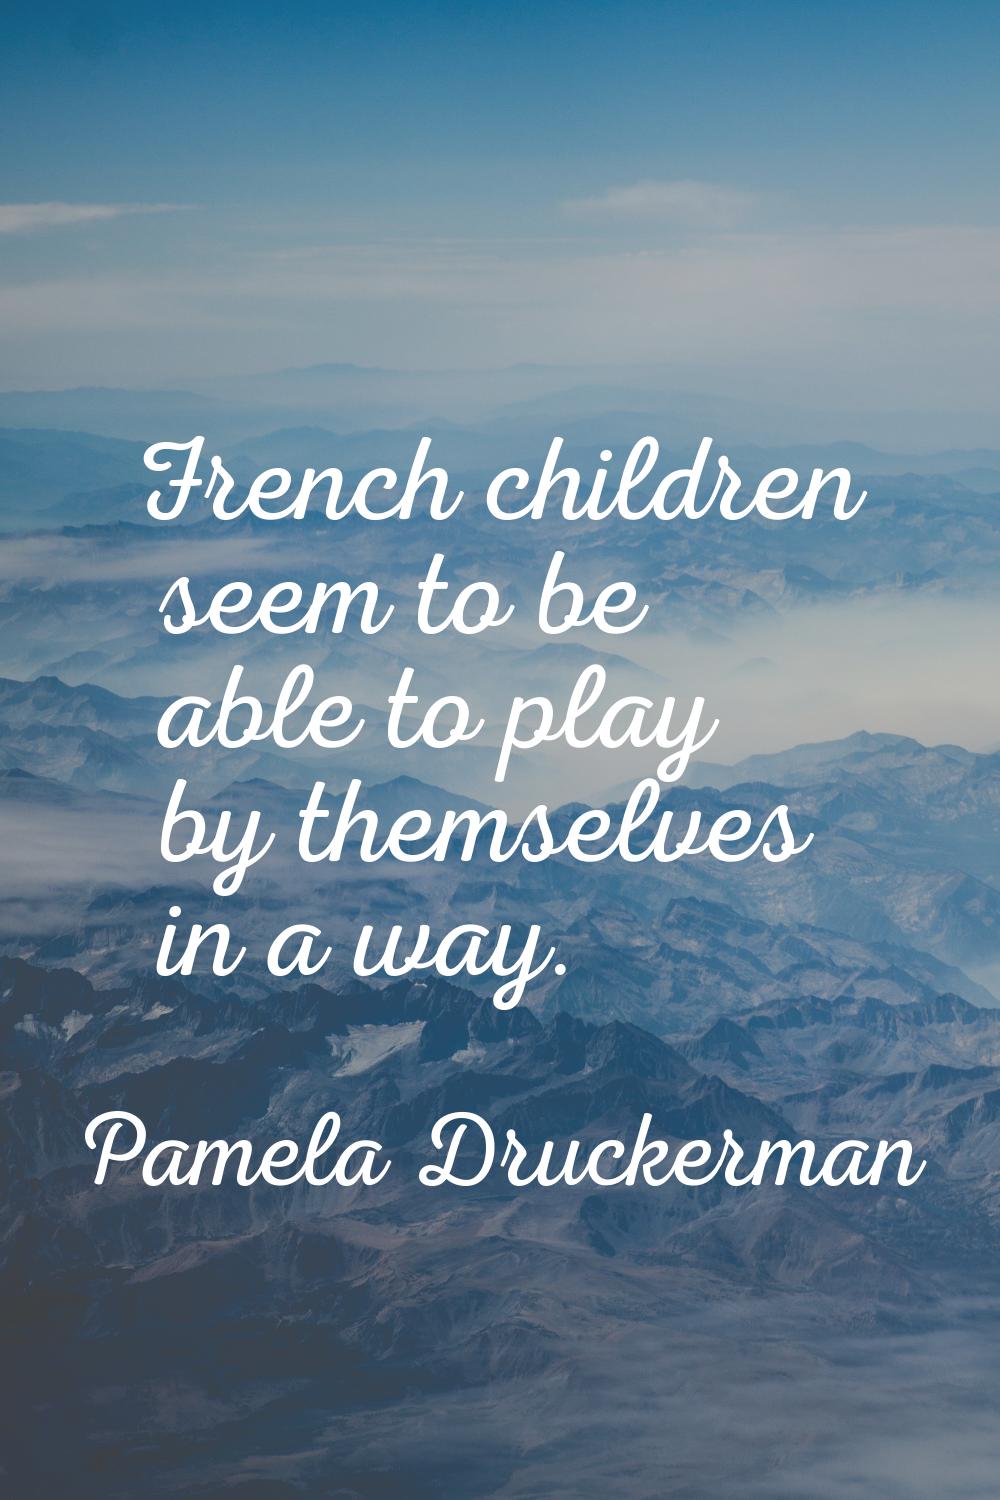 French children seem to be able to play by themselves in a way.